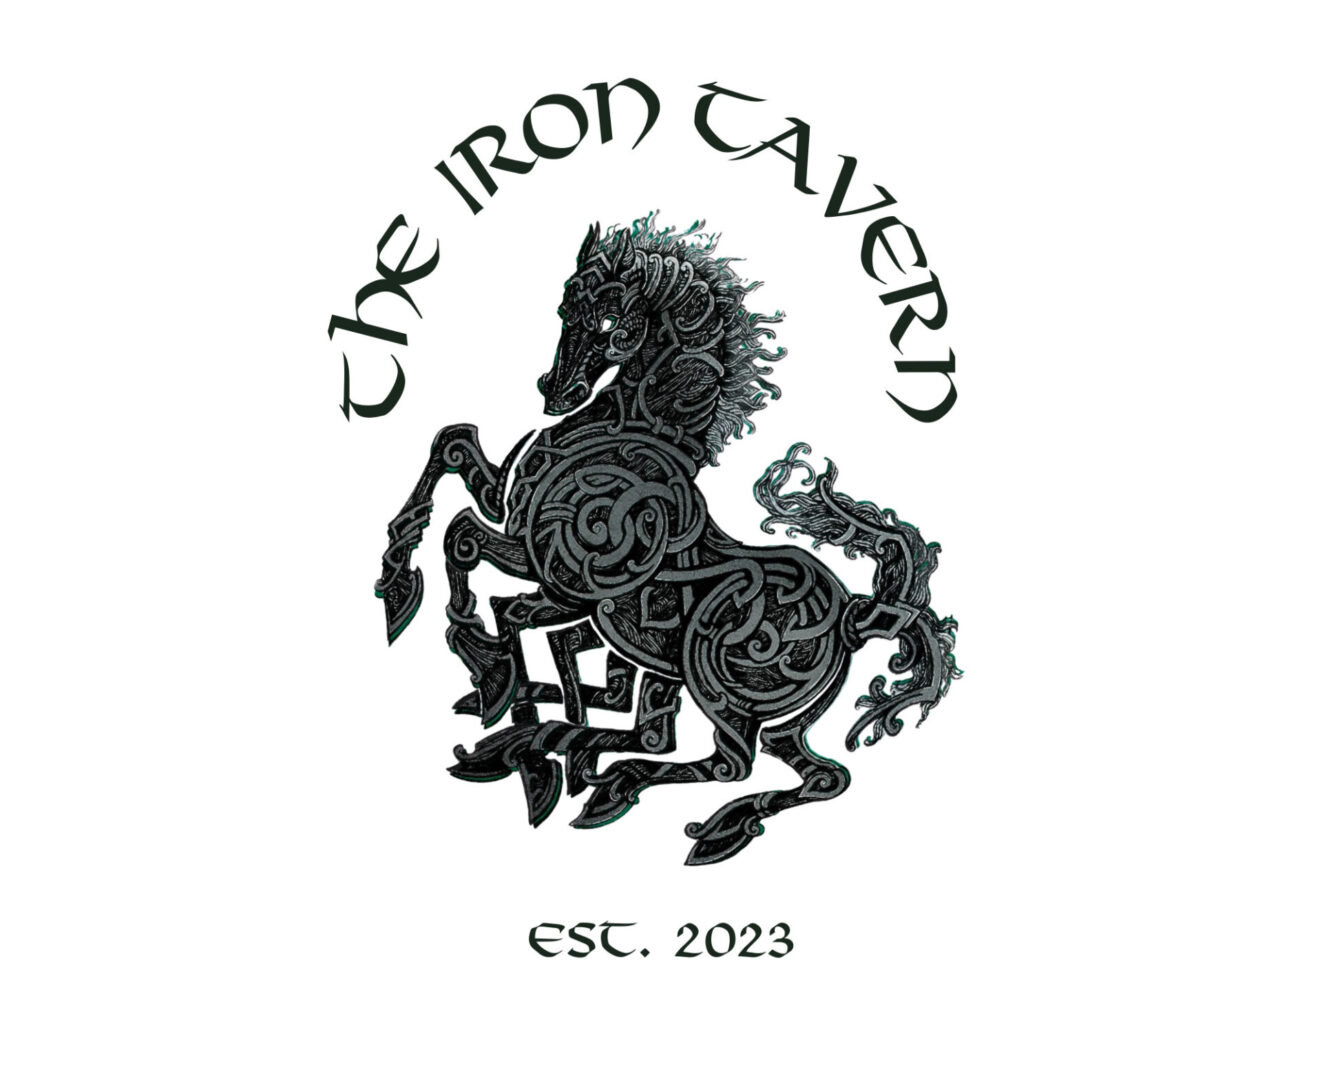 A black and white logo of the iron tavern.